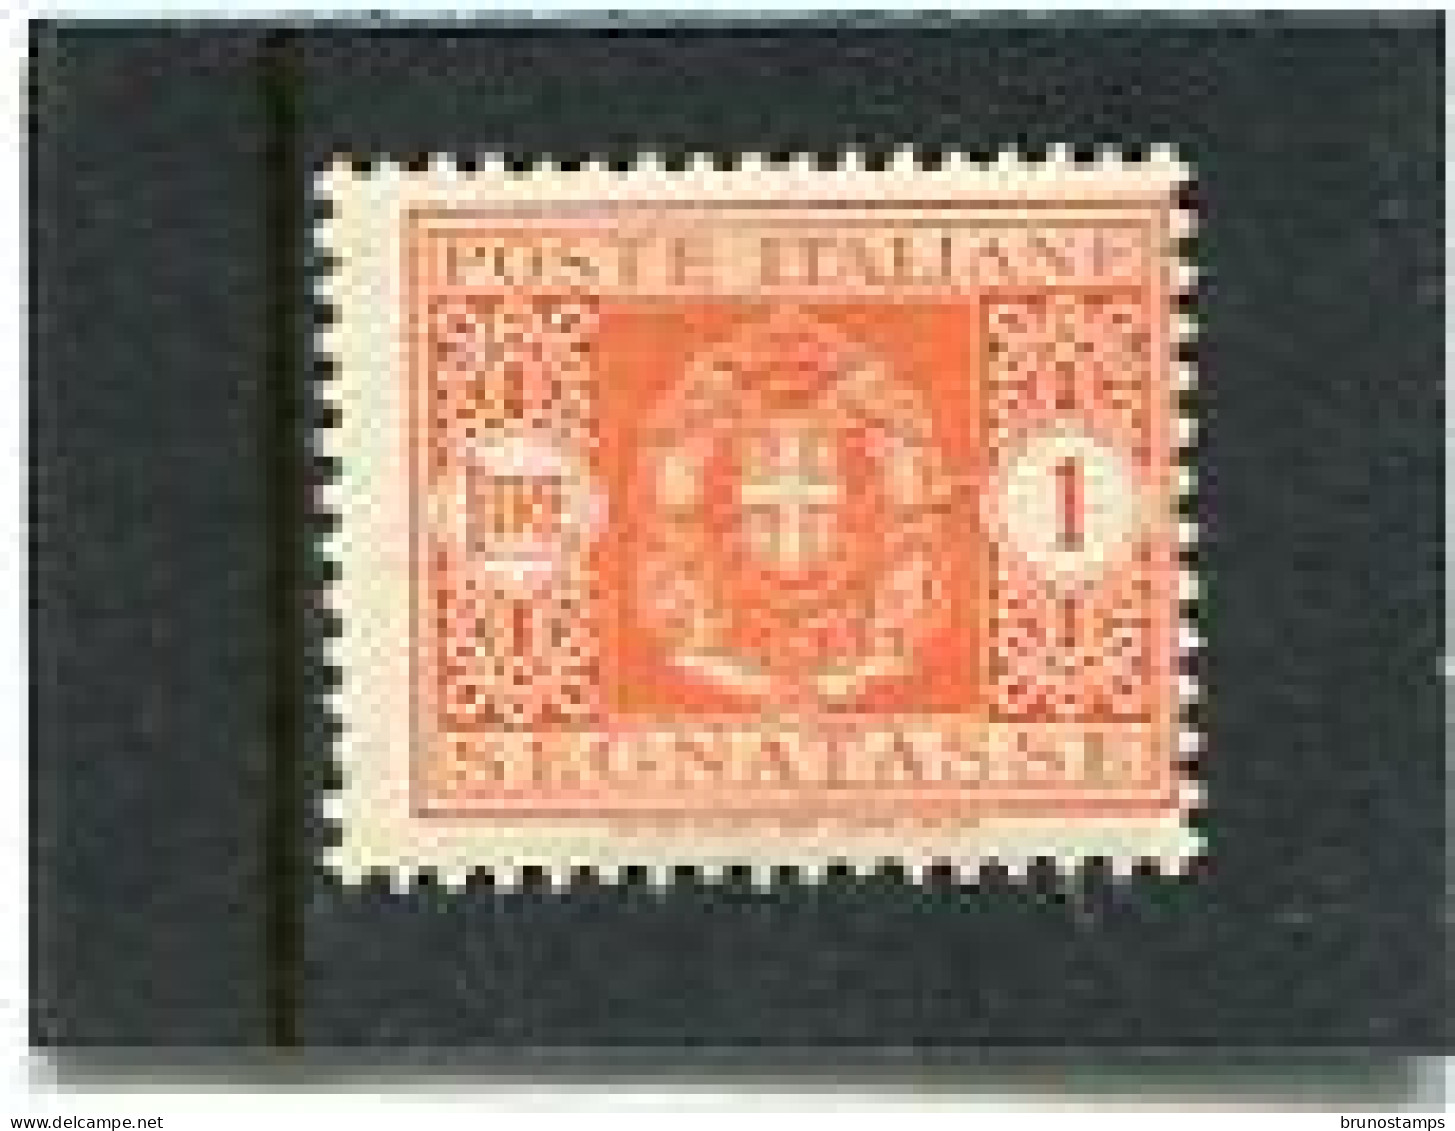 ITALY/ITALIA - 1934  POSTAGE DUE  1 L  MINT NH - Strafport